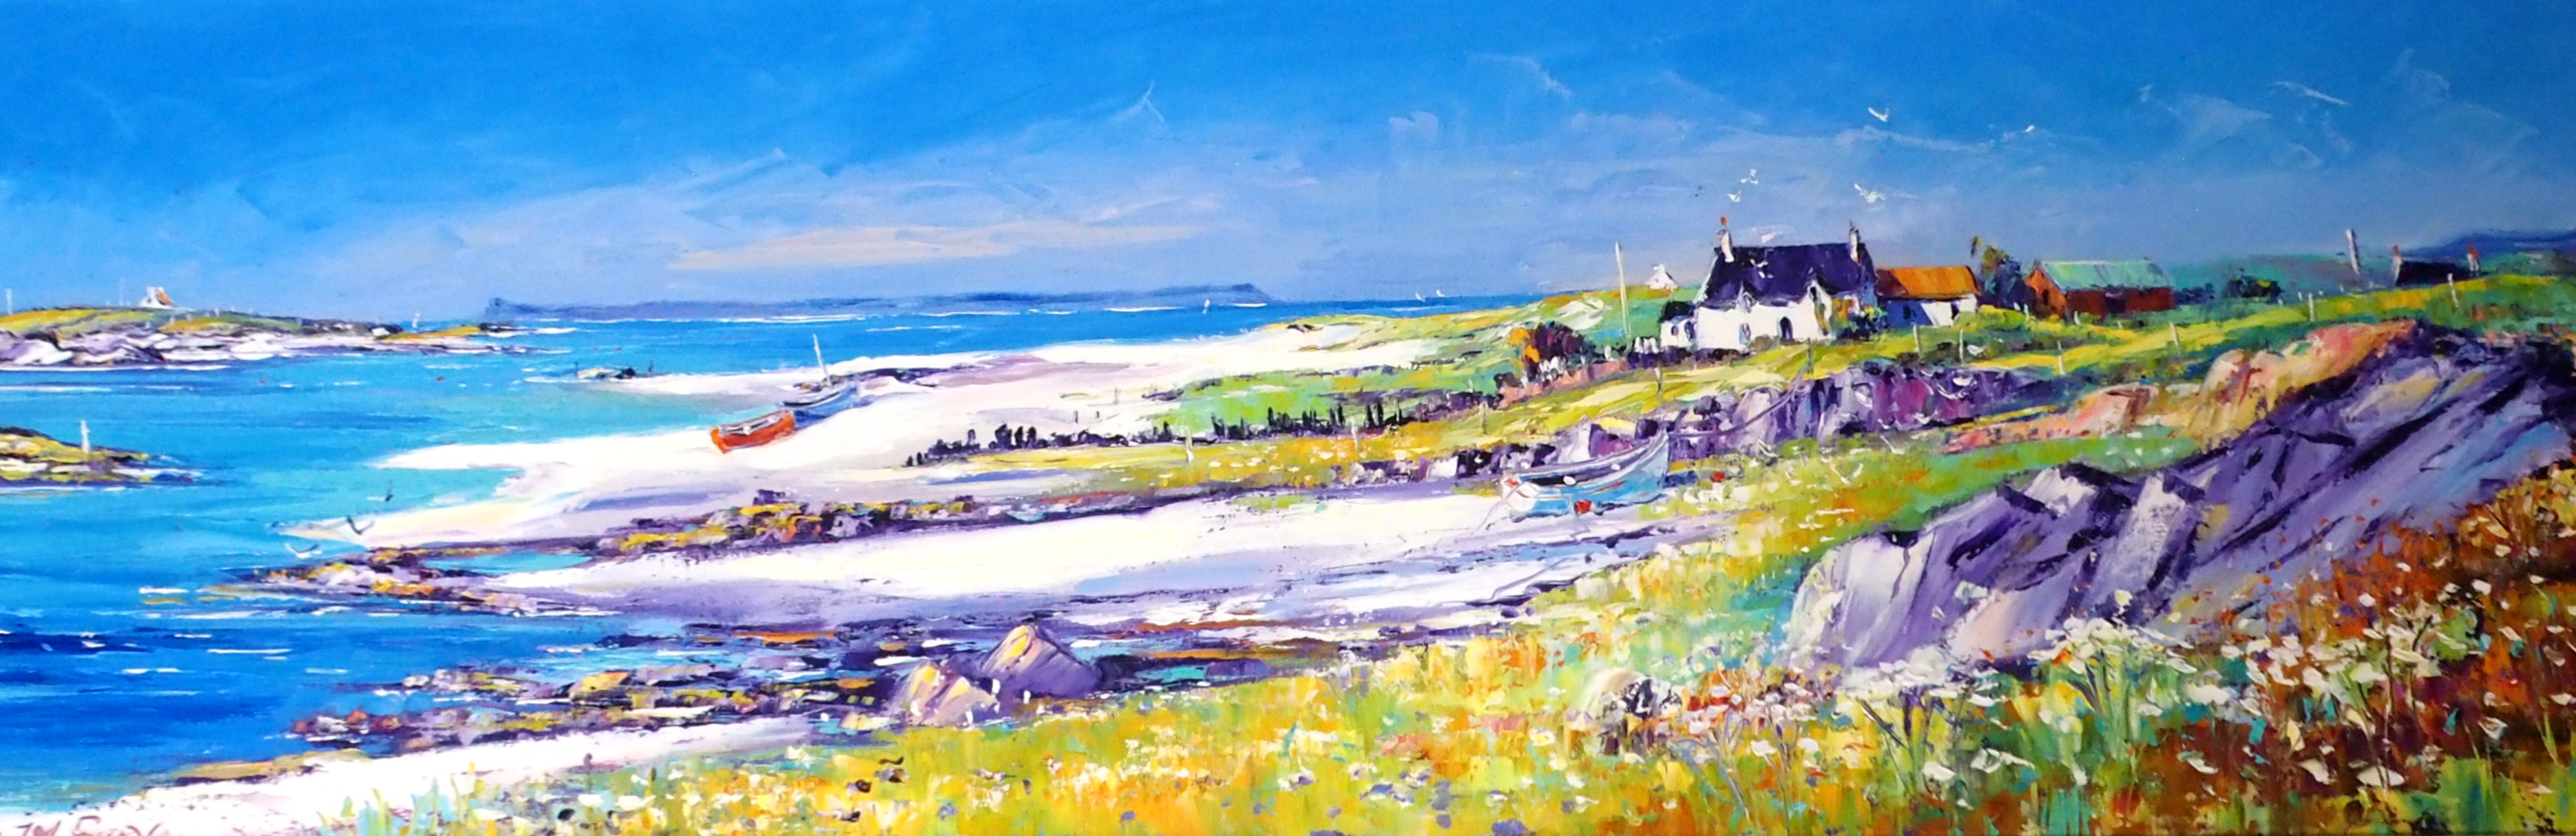 •JEAN FEENEY (BRITISH CONTEMPORARY) BRIGHT SUMMER DAY, ARISAIG Acrylic on canvas, signed, 40 x 120cm